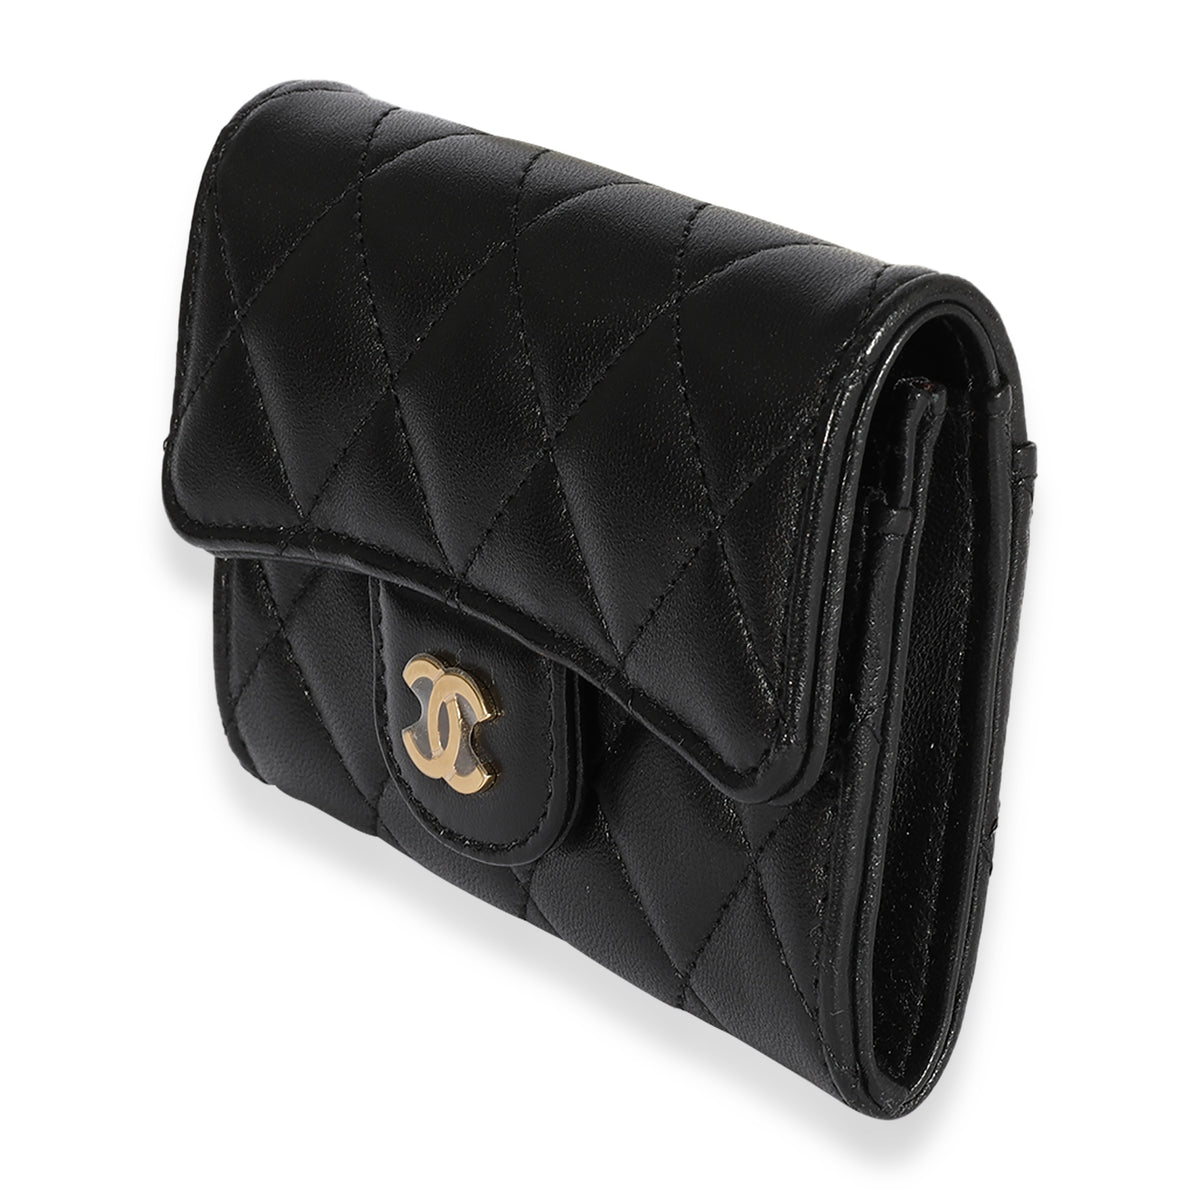 CHANEL BLACK CAVIAR QUILTED LEATHER CC WOC GOLD CC HW BAG WALLET ON CHAIN  NEW  eBay